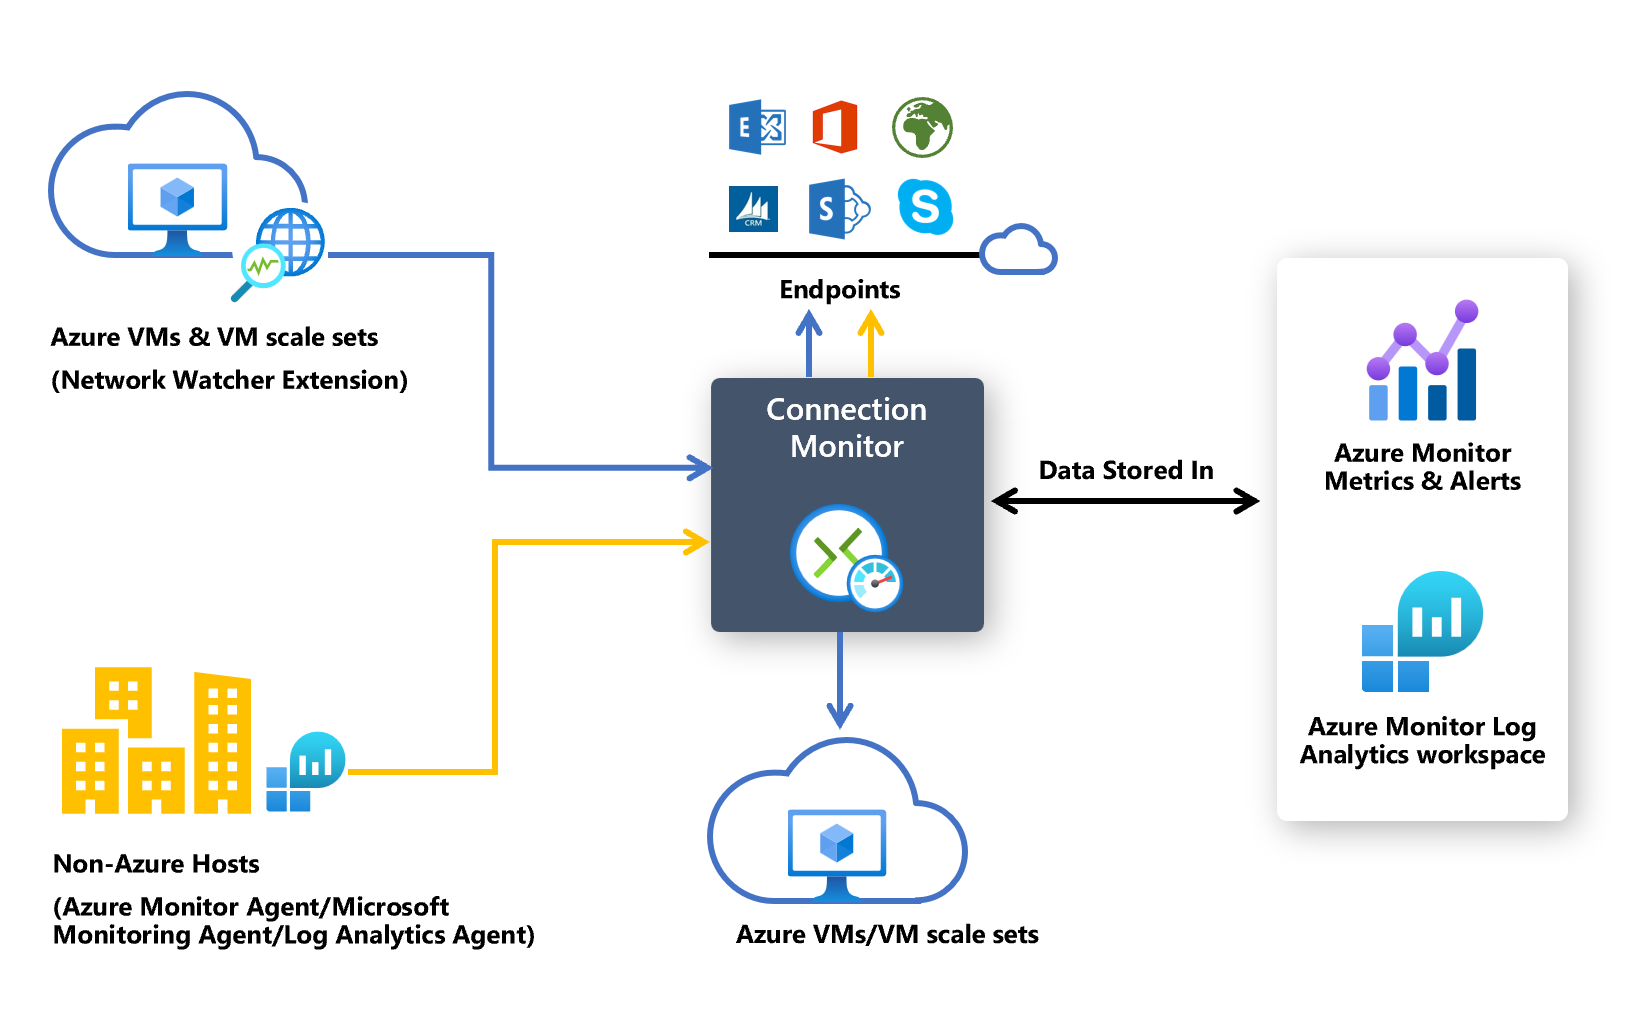 Diagram showing how Connection Monitor interacts with Azure VMs, non-Azure hosts, endpoints, and data storage locations.